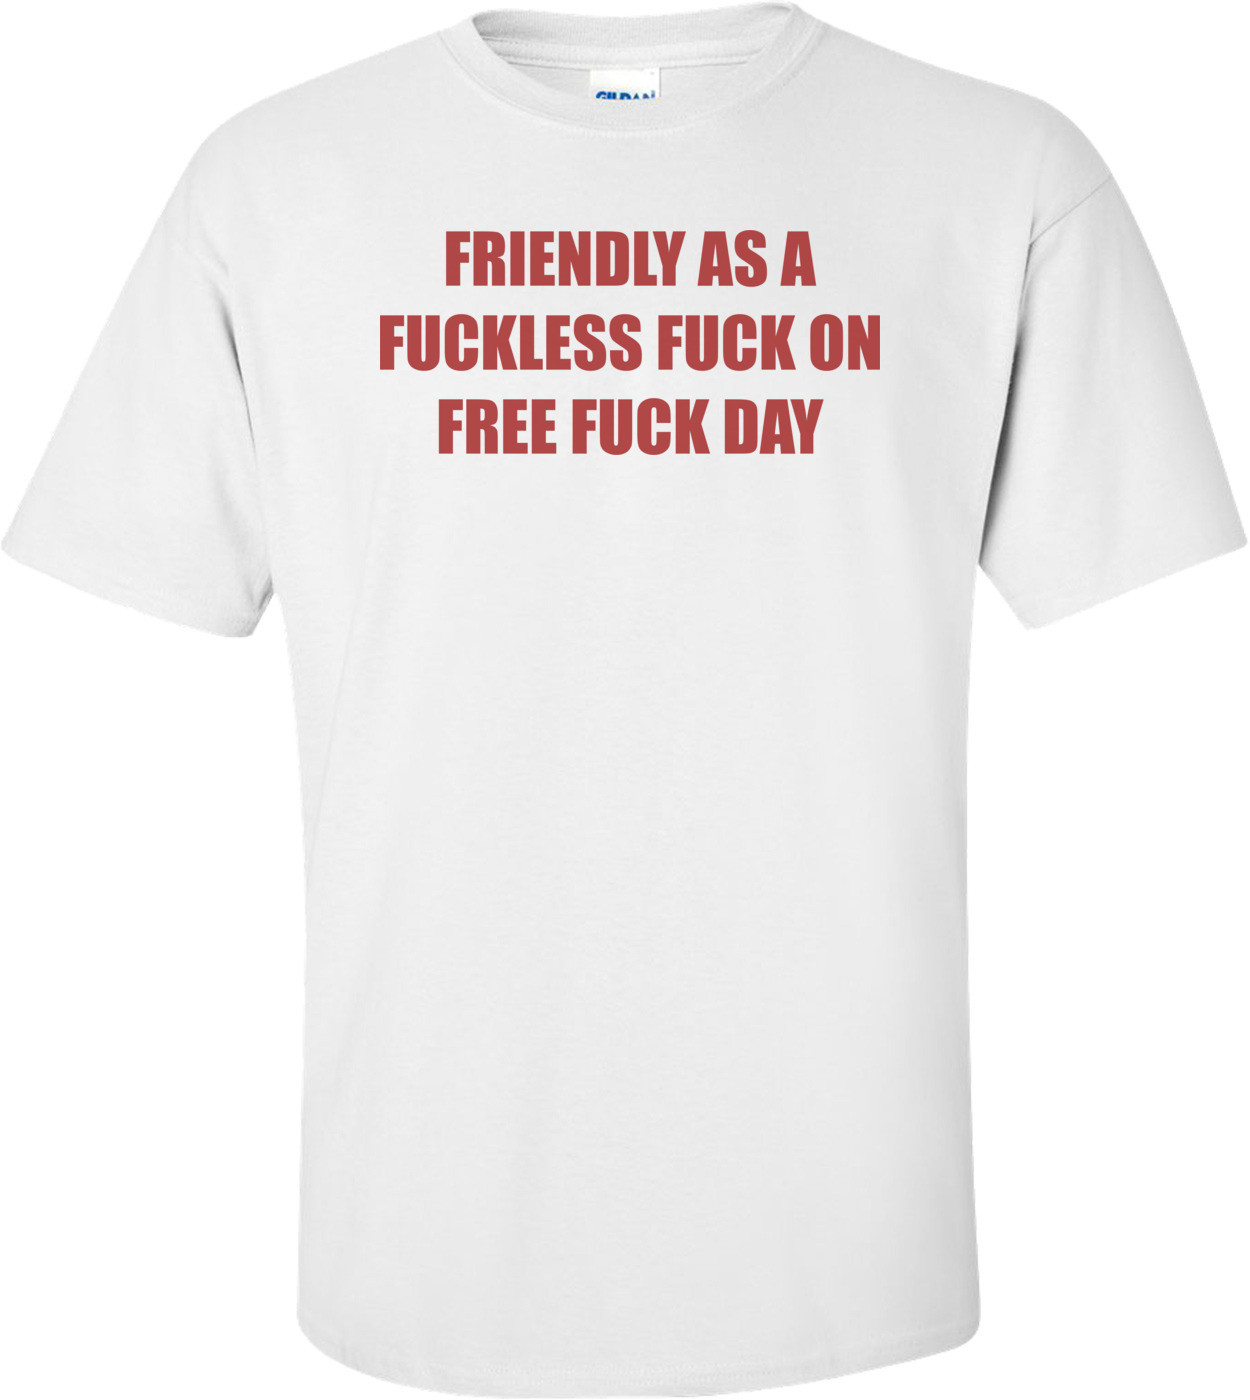 FRIENDLY AS A FUCKLESS FUCK ON FREE FUCK DAY